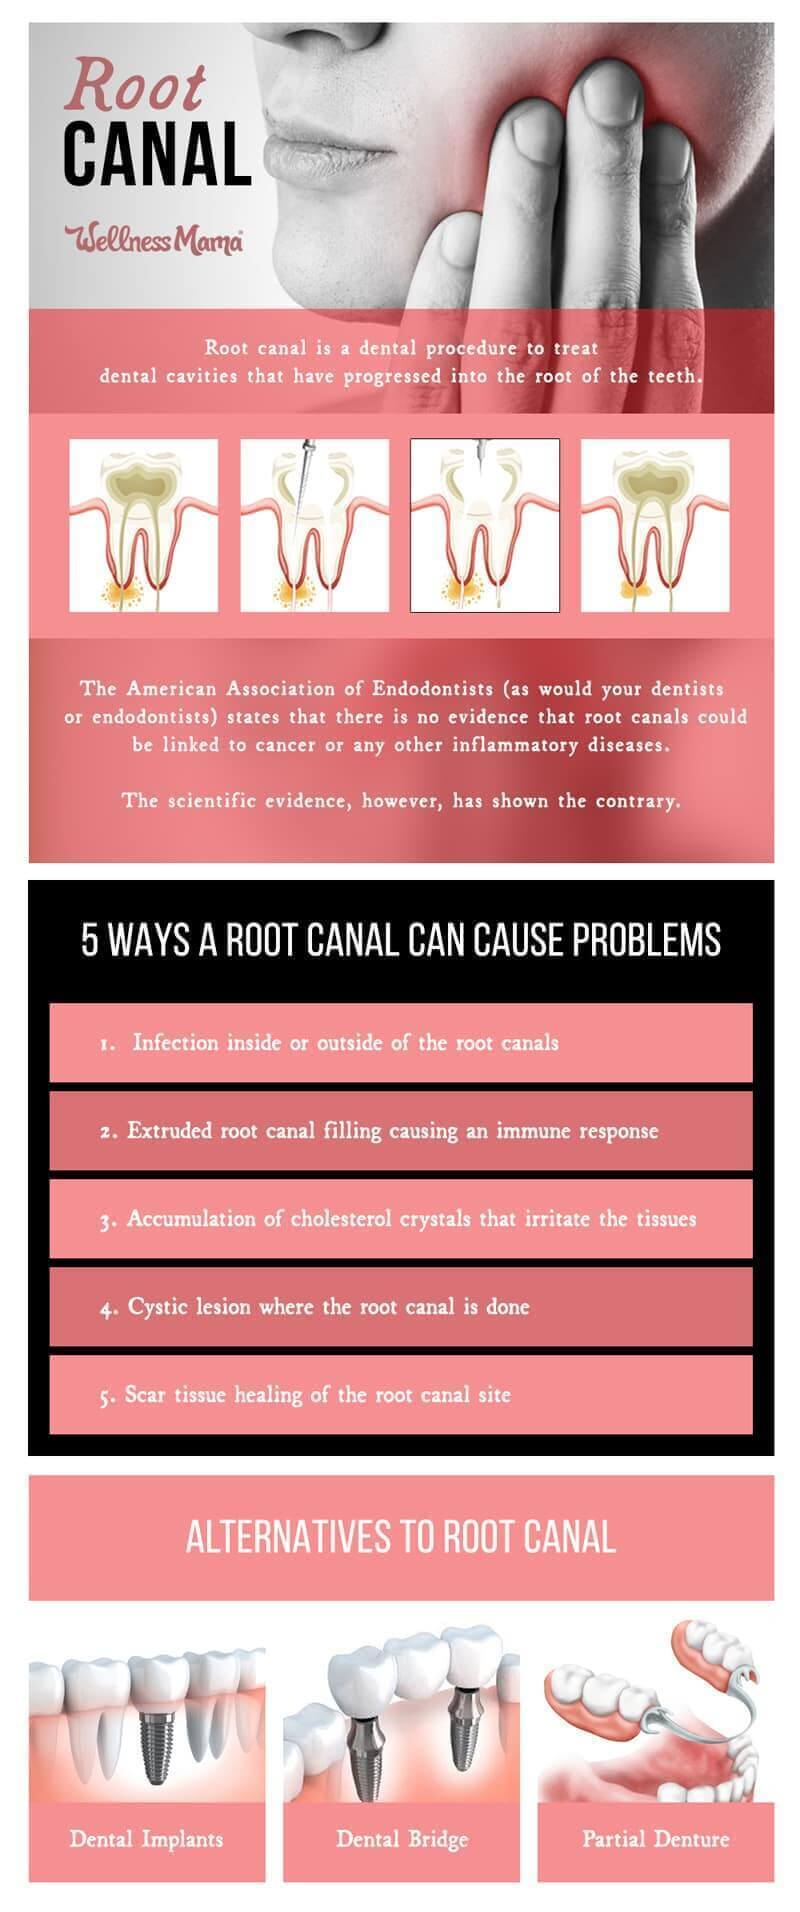 Ever wondered if a root canal is safe? Learn what the science says about the risks and ways to protect your health before your next procedure.